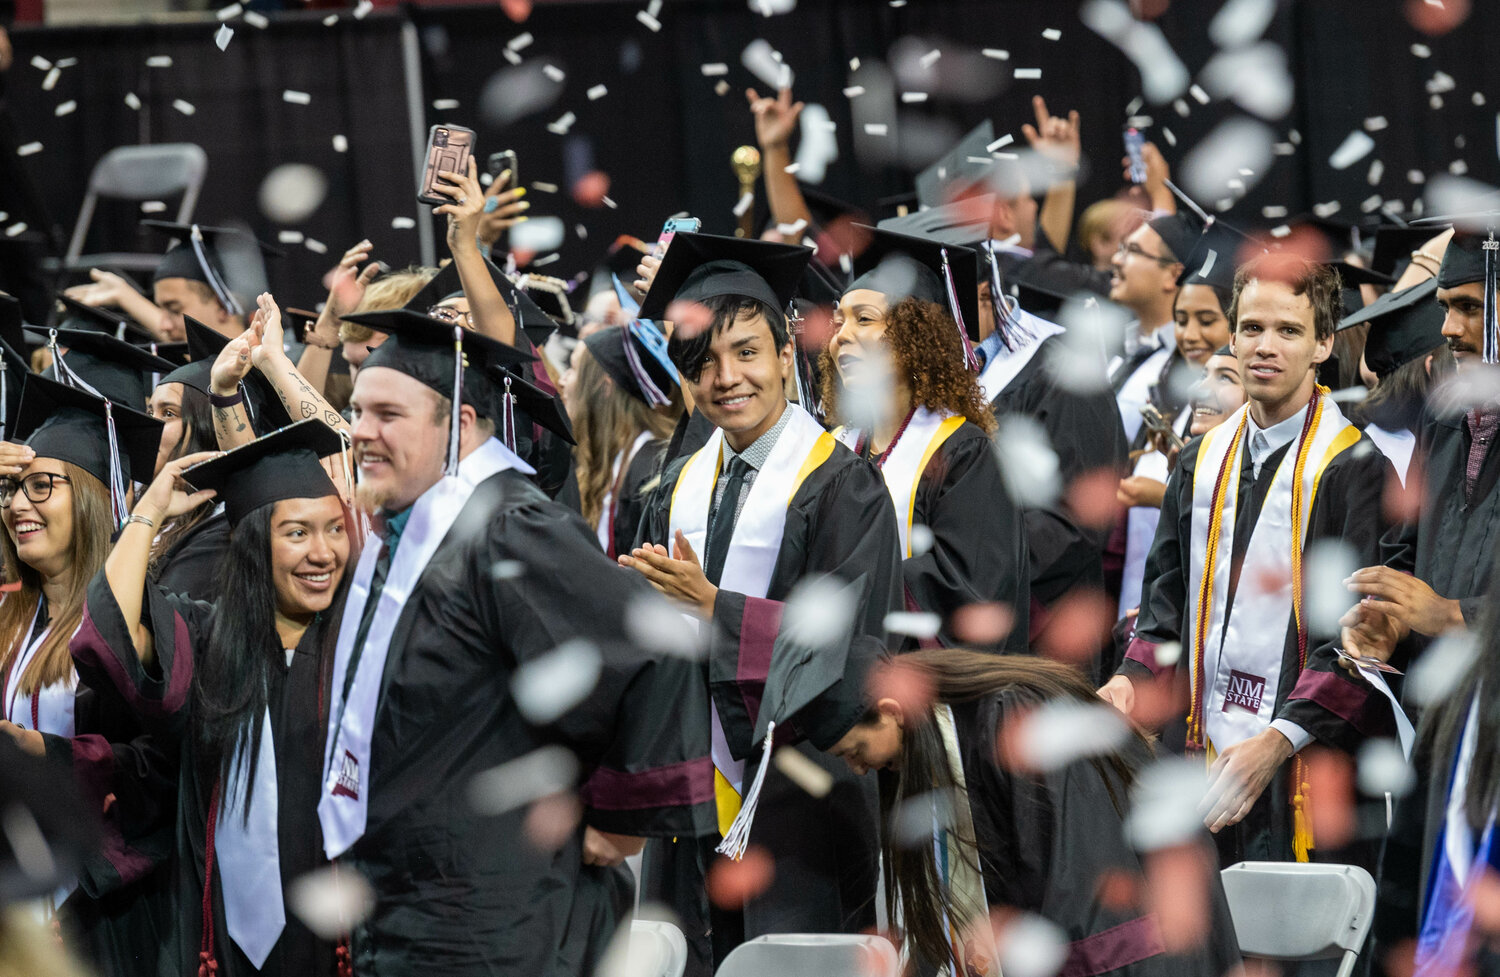 New Mexico State University will recognize fall 2023 graduates during commencement ceremonies at 6 p.m. Friday, Dec. 8, and 10 a.m. Saturday, Dec. 9, at the Pan American Center. The Friday ceremony will honor students receiving master’s degrees and Ph.D.s, while the Saturday ceremony will celebrate those earning bachelor’s degrees.